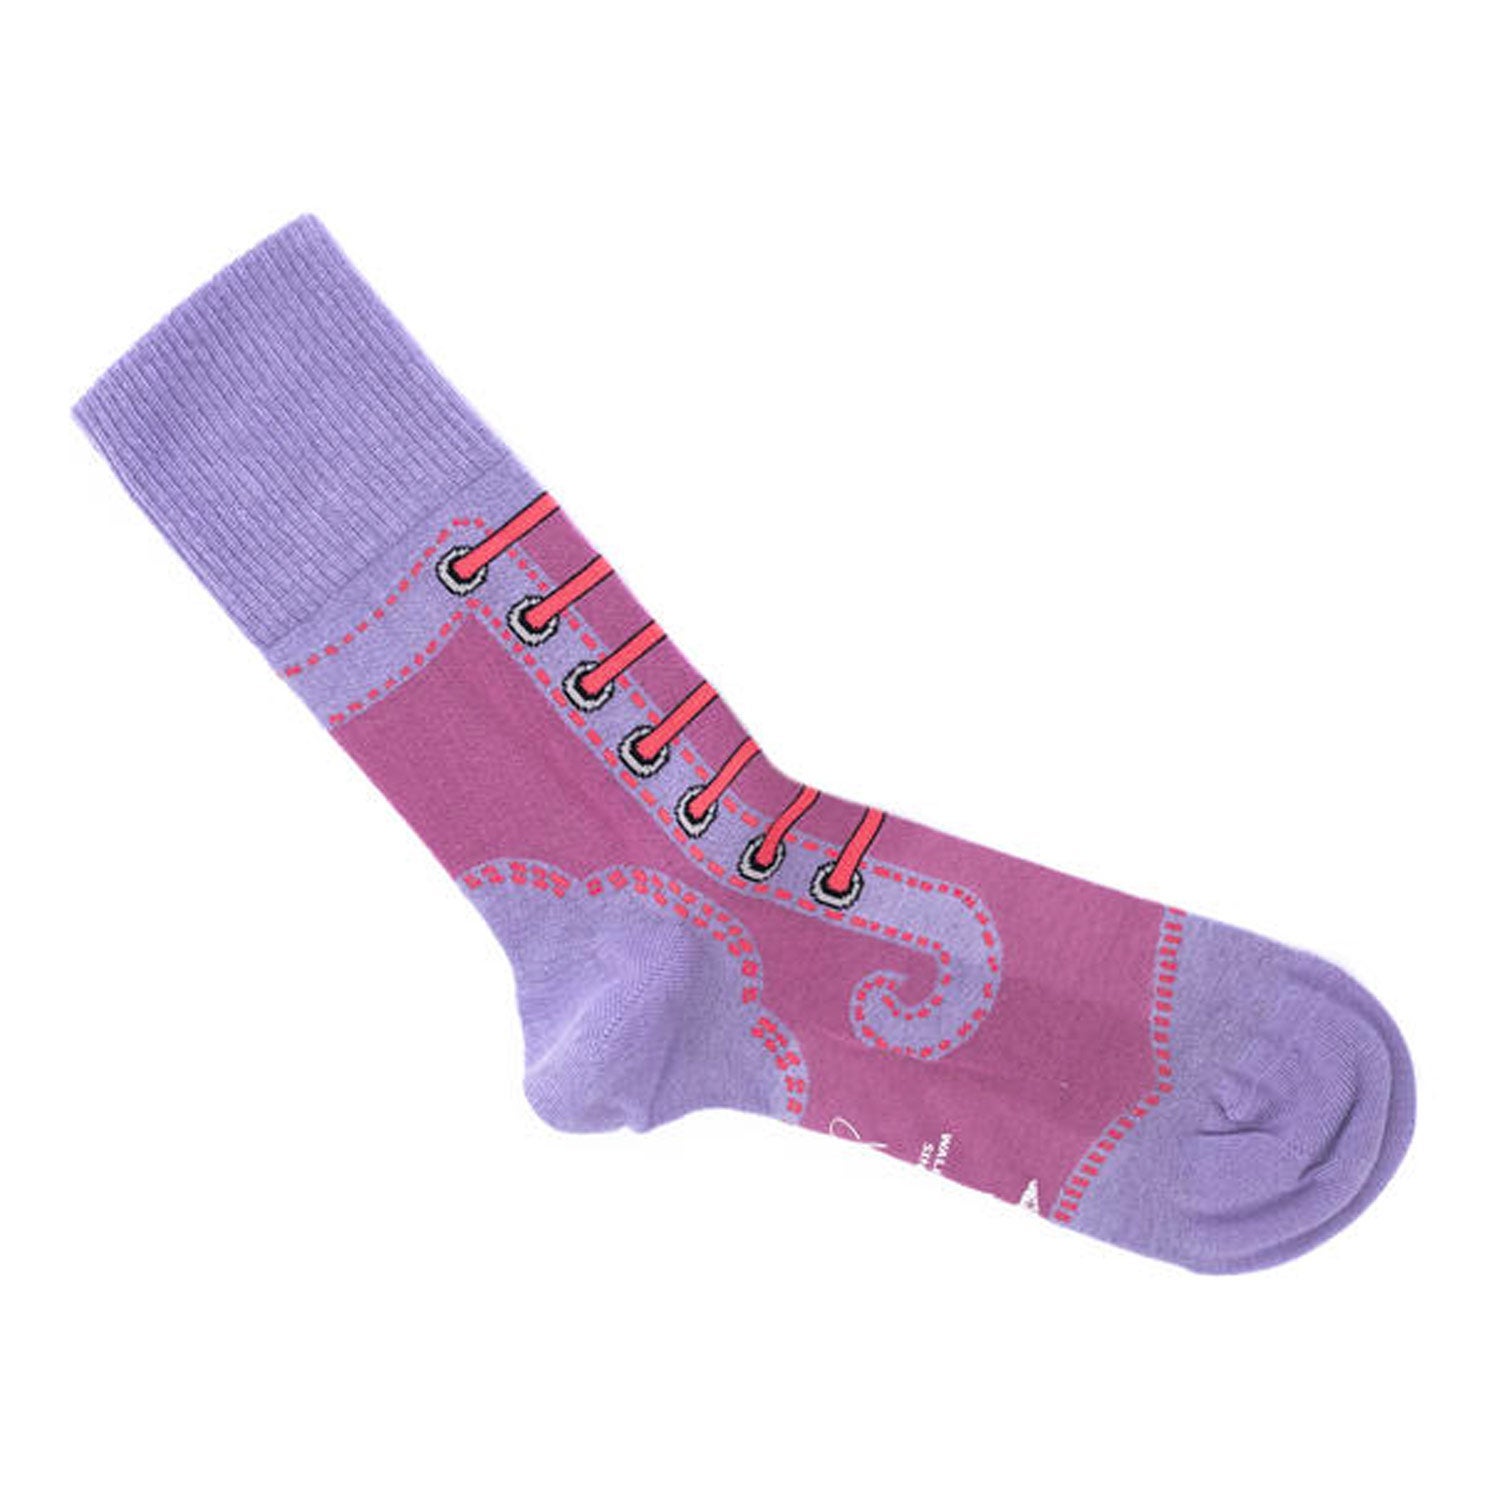 stocking fillers Pink ombre lace patterned socks unisex socks